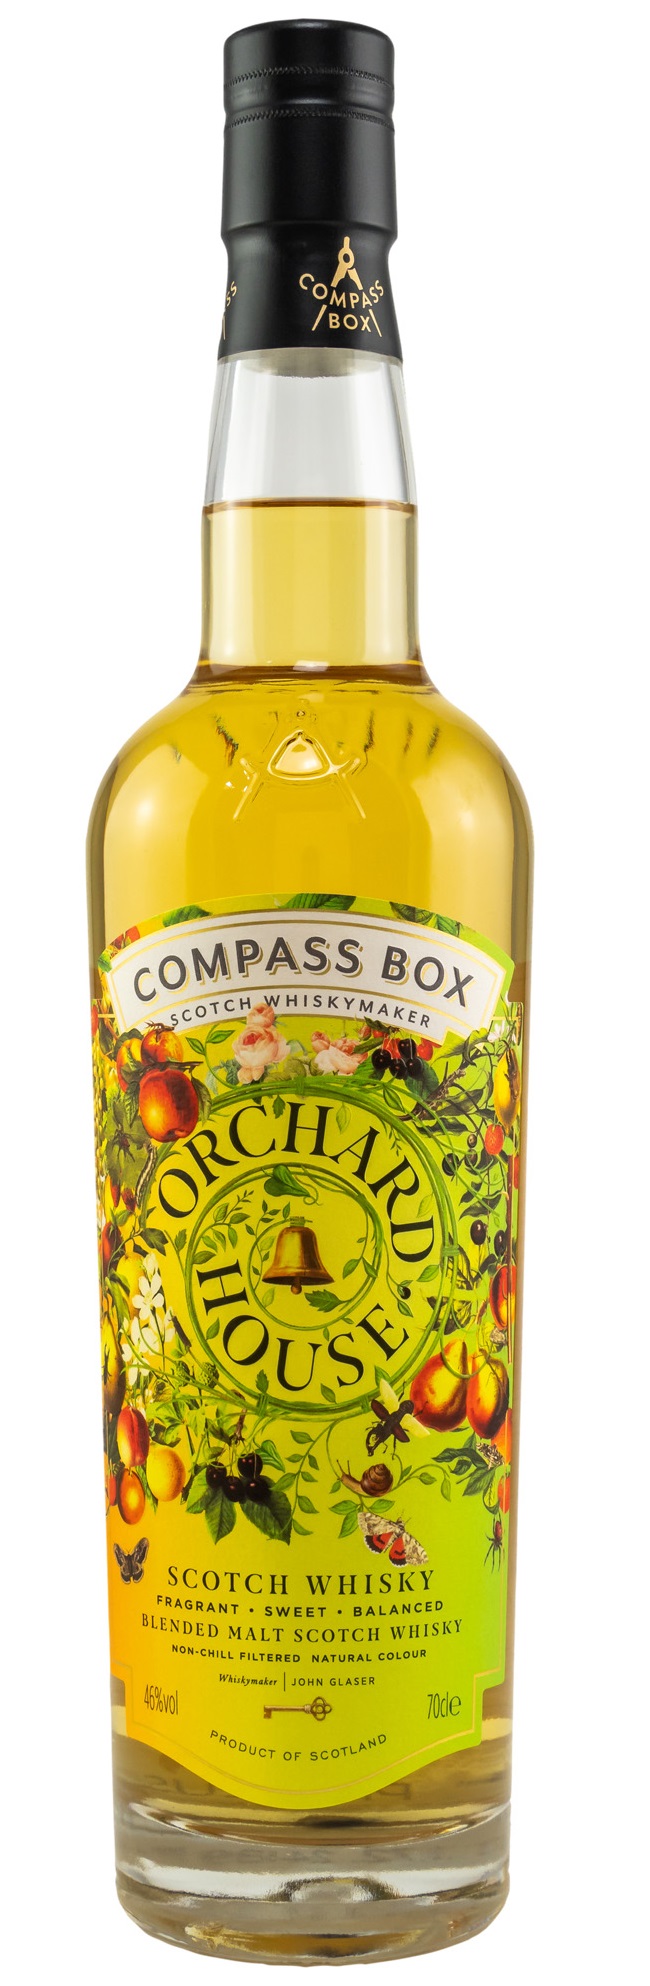 Compass Box Orchard House 46.0% 0,7l